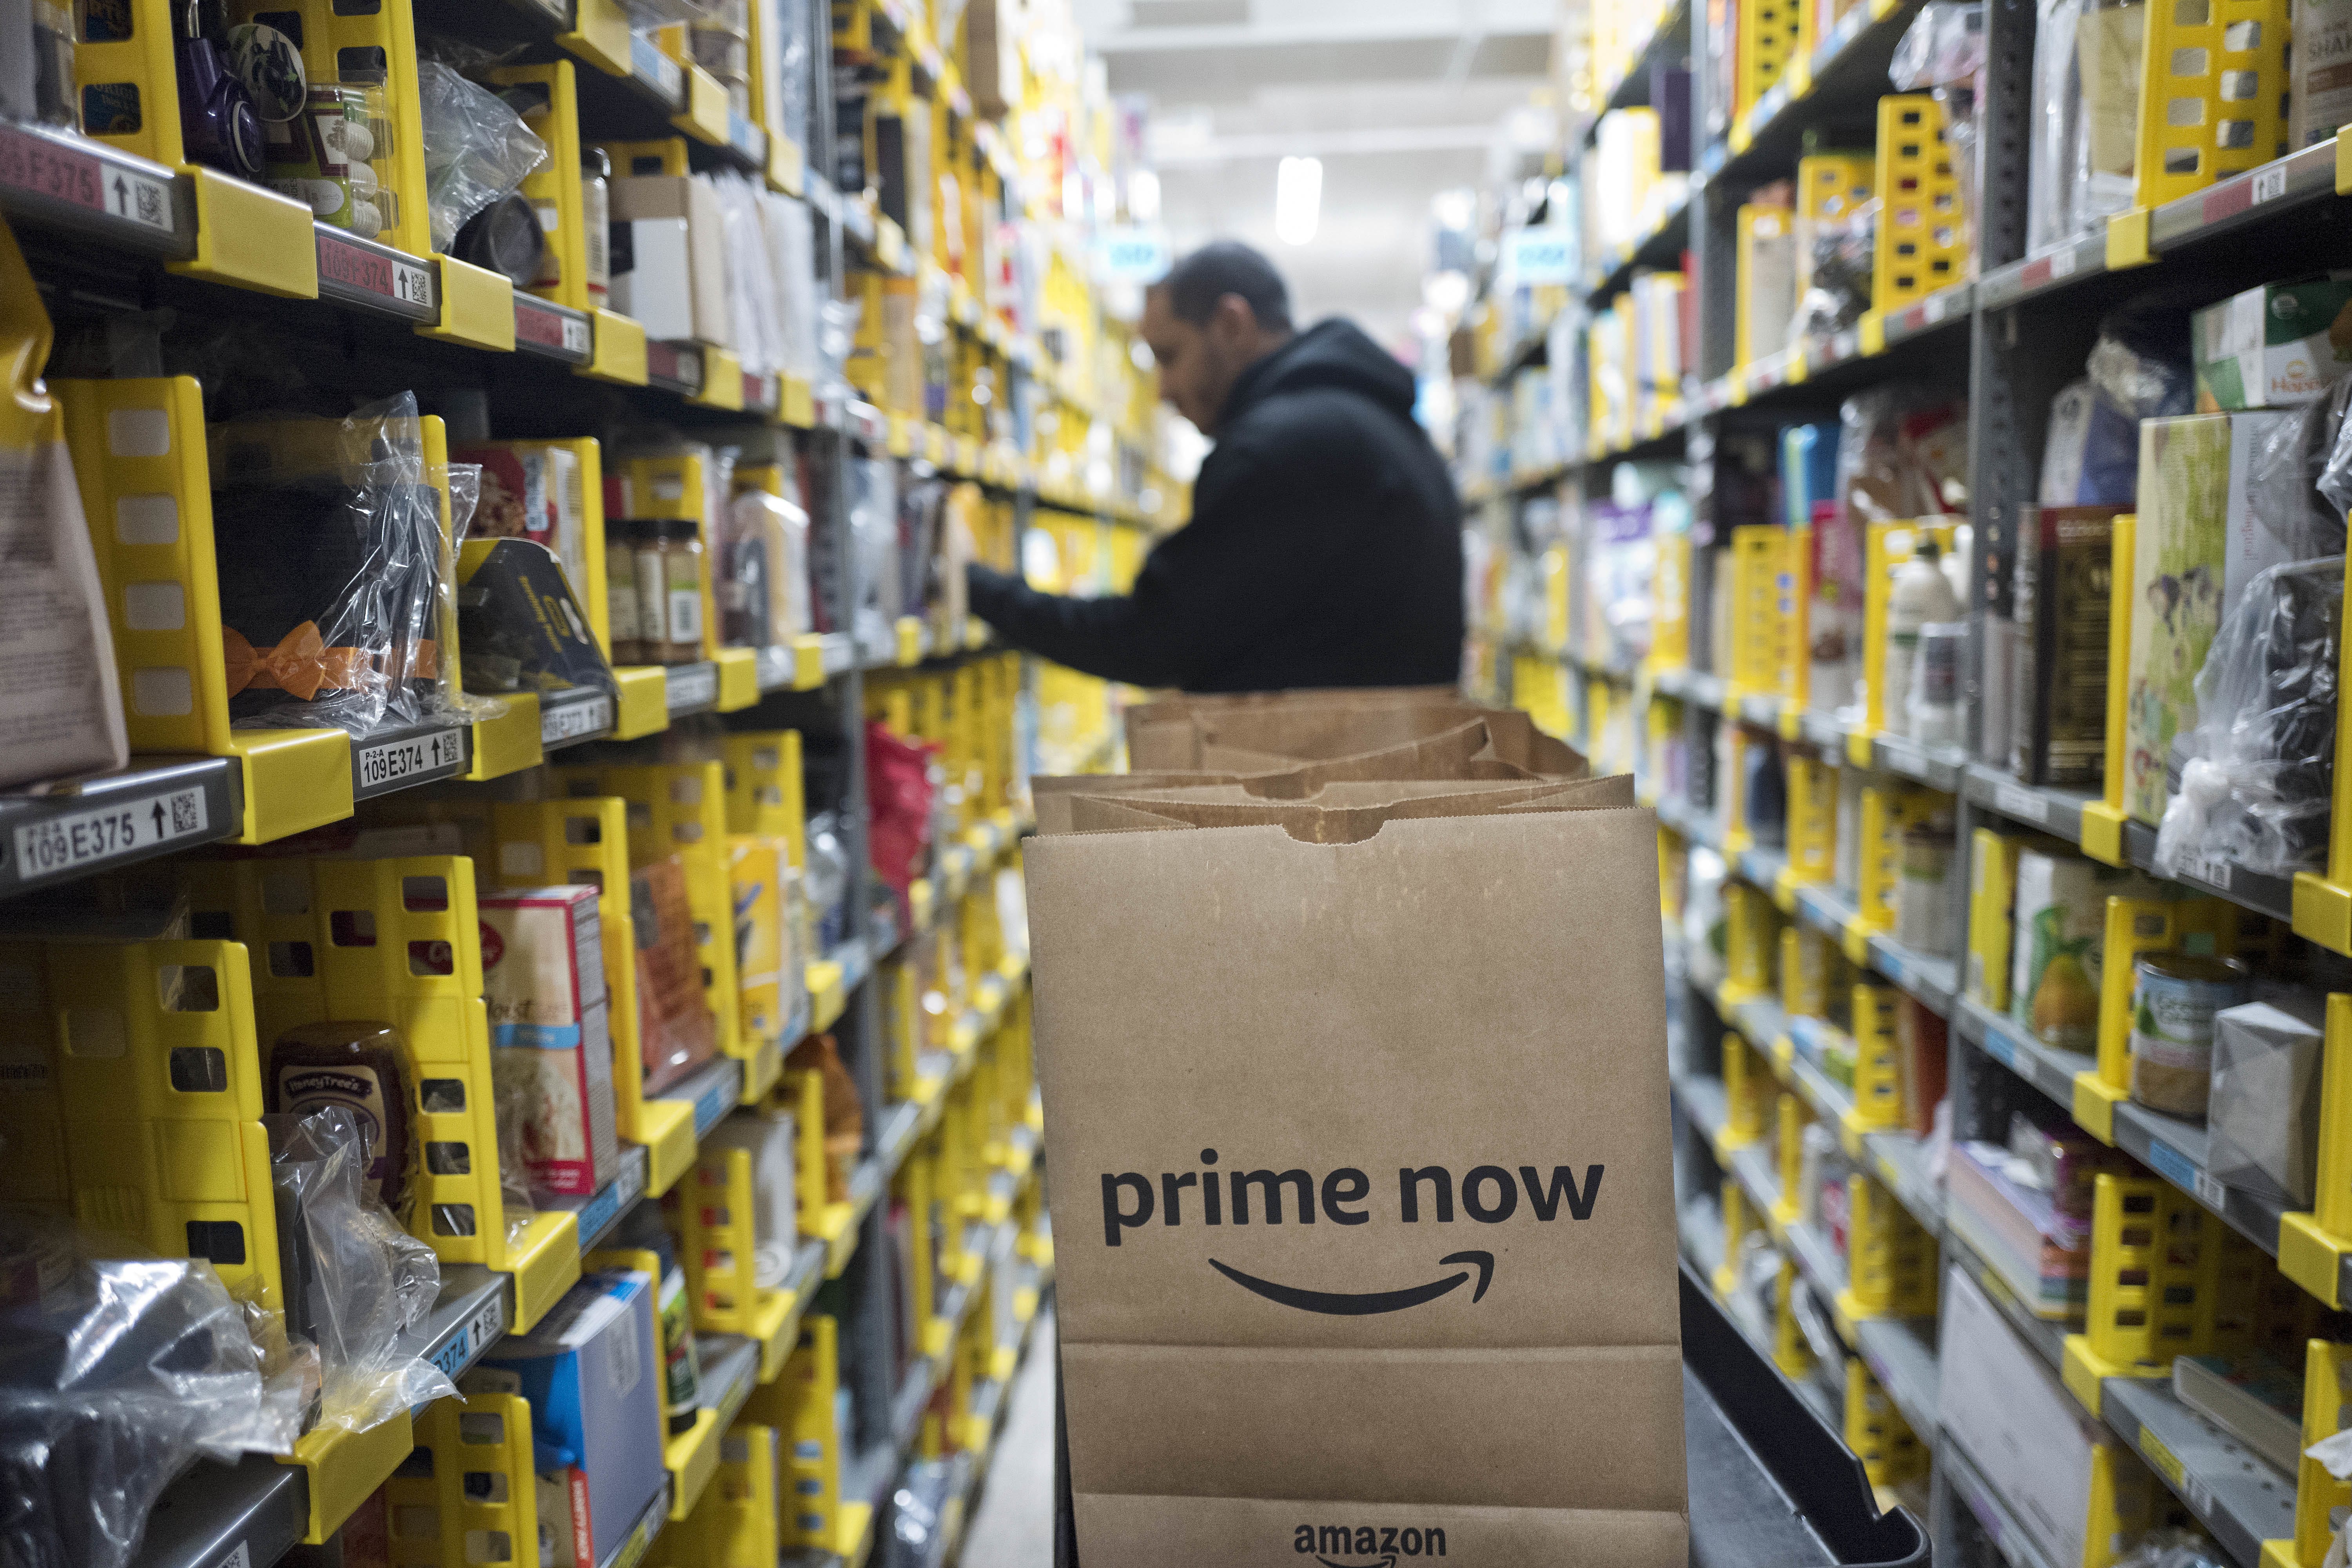 FILE - In this Wednesday, Dec. 20, 2017, file photo, a clerk reaches to a shelf to pick an item for a customer order at the Amazon Prime warehouse, in New York. Amazon announced Thursday, Jan. 18, 2018, that it has narrowed down its potential site for a second headquarters in North America to 20 metropolitan areas, mainly on the East Coast.